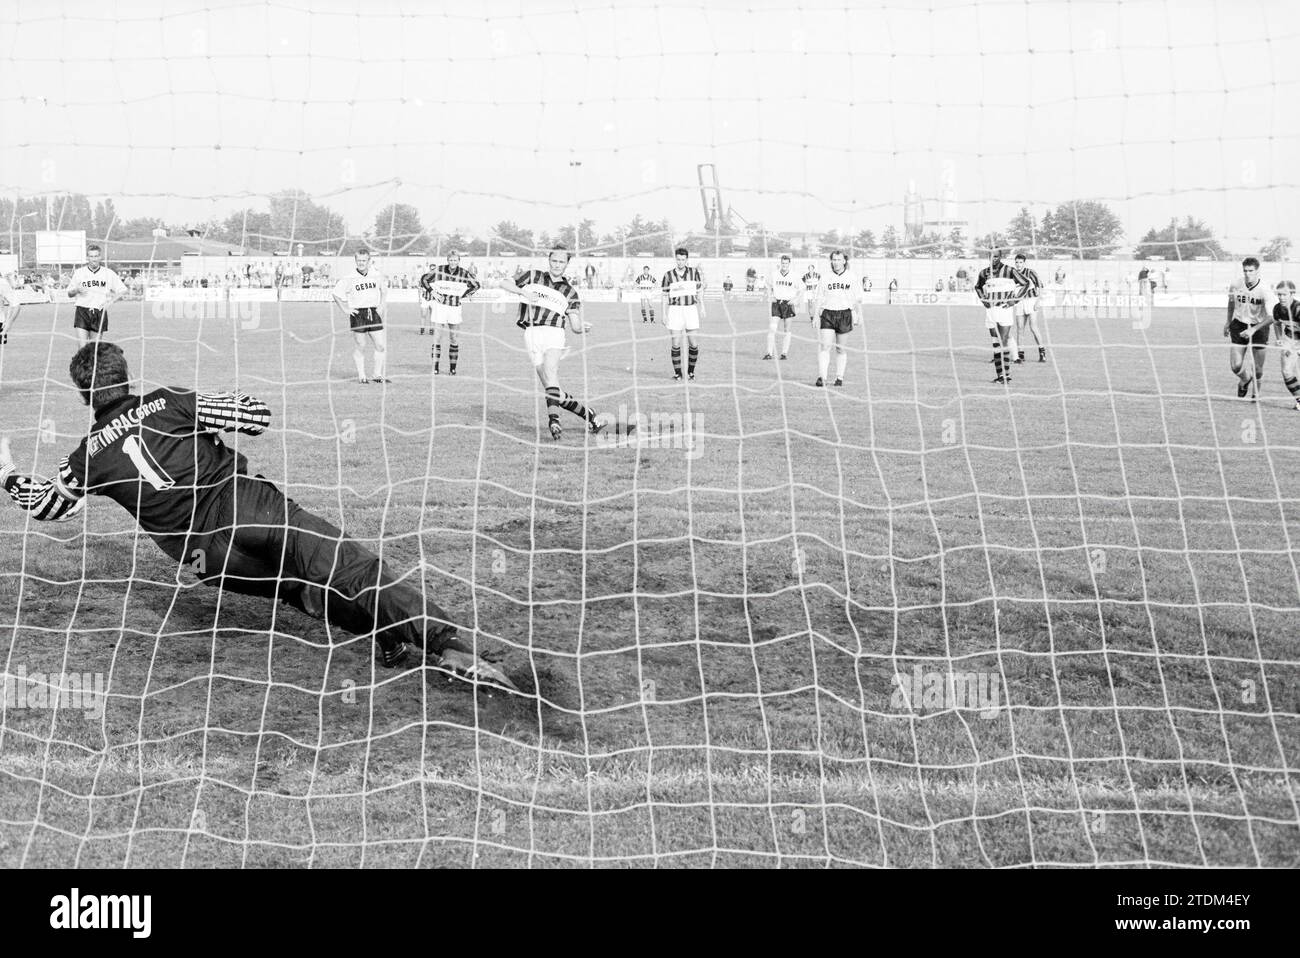 Football RCH-Halsteren, 02-06-1992, Whizgle News from the Past, Tailored for the Future. Explore historical narratives, Dutch The Netherlands agency image with a modern perspective, bridging the gap between yesterday's events and tomorrow's insights. A timeless journey shaping the stories that shape our future Stock Photo